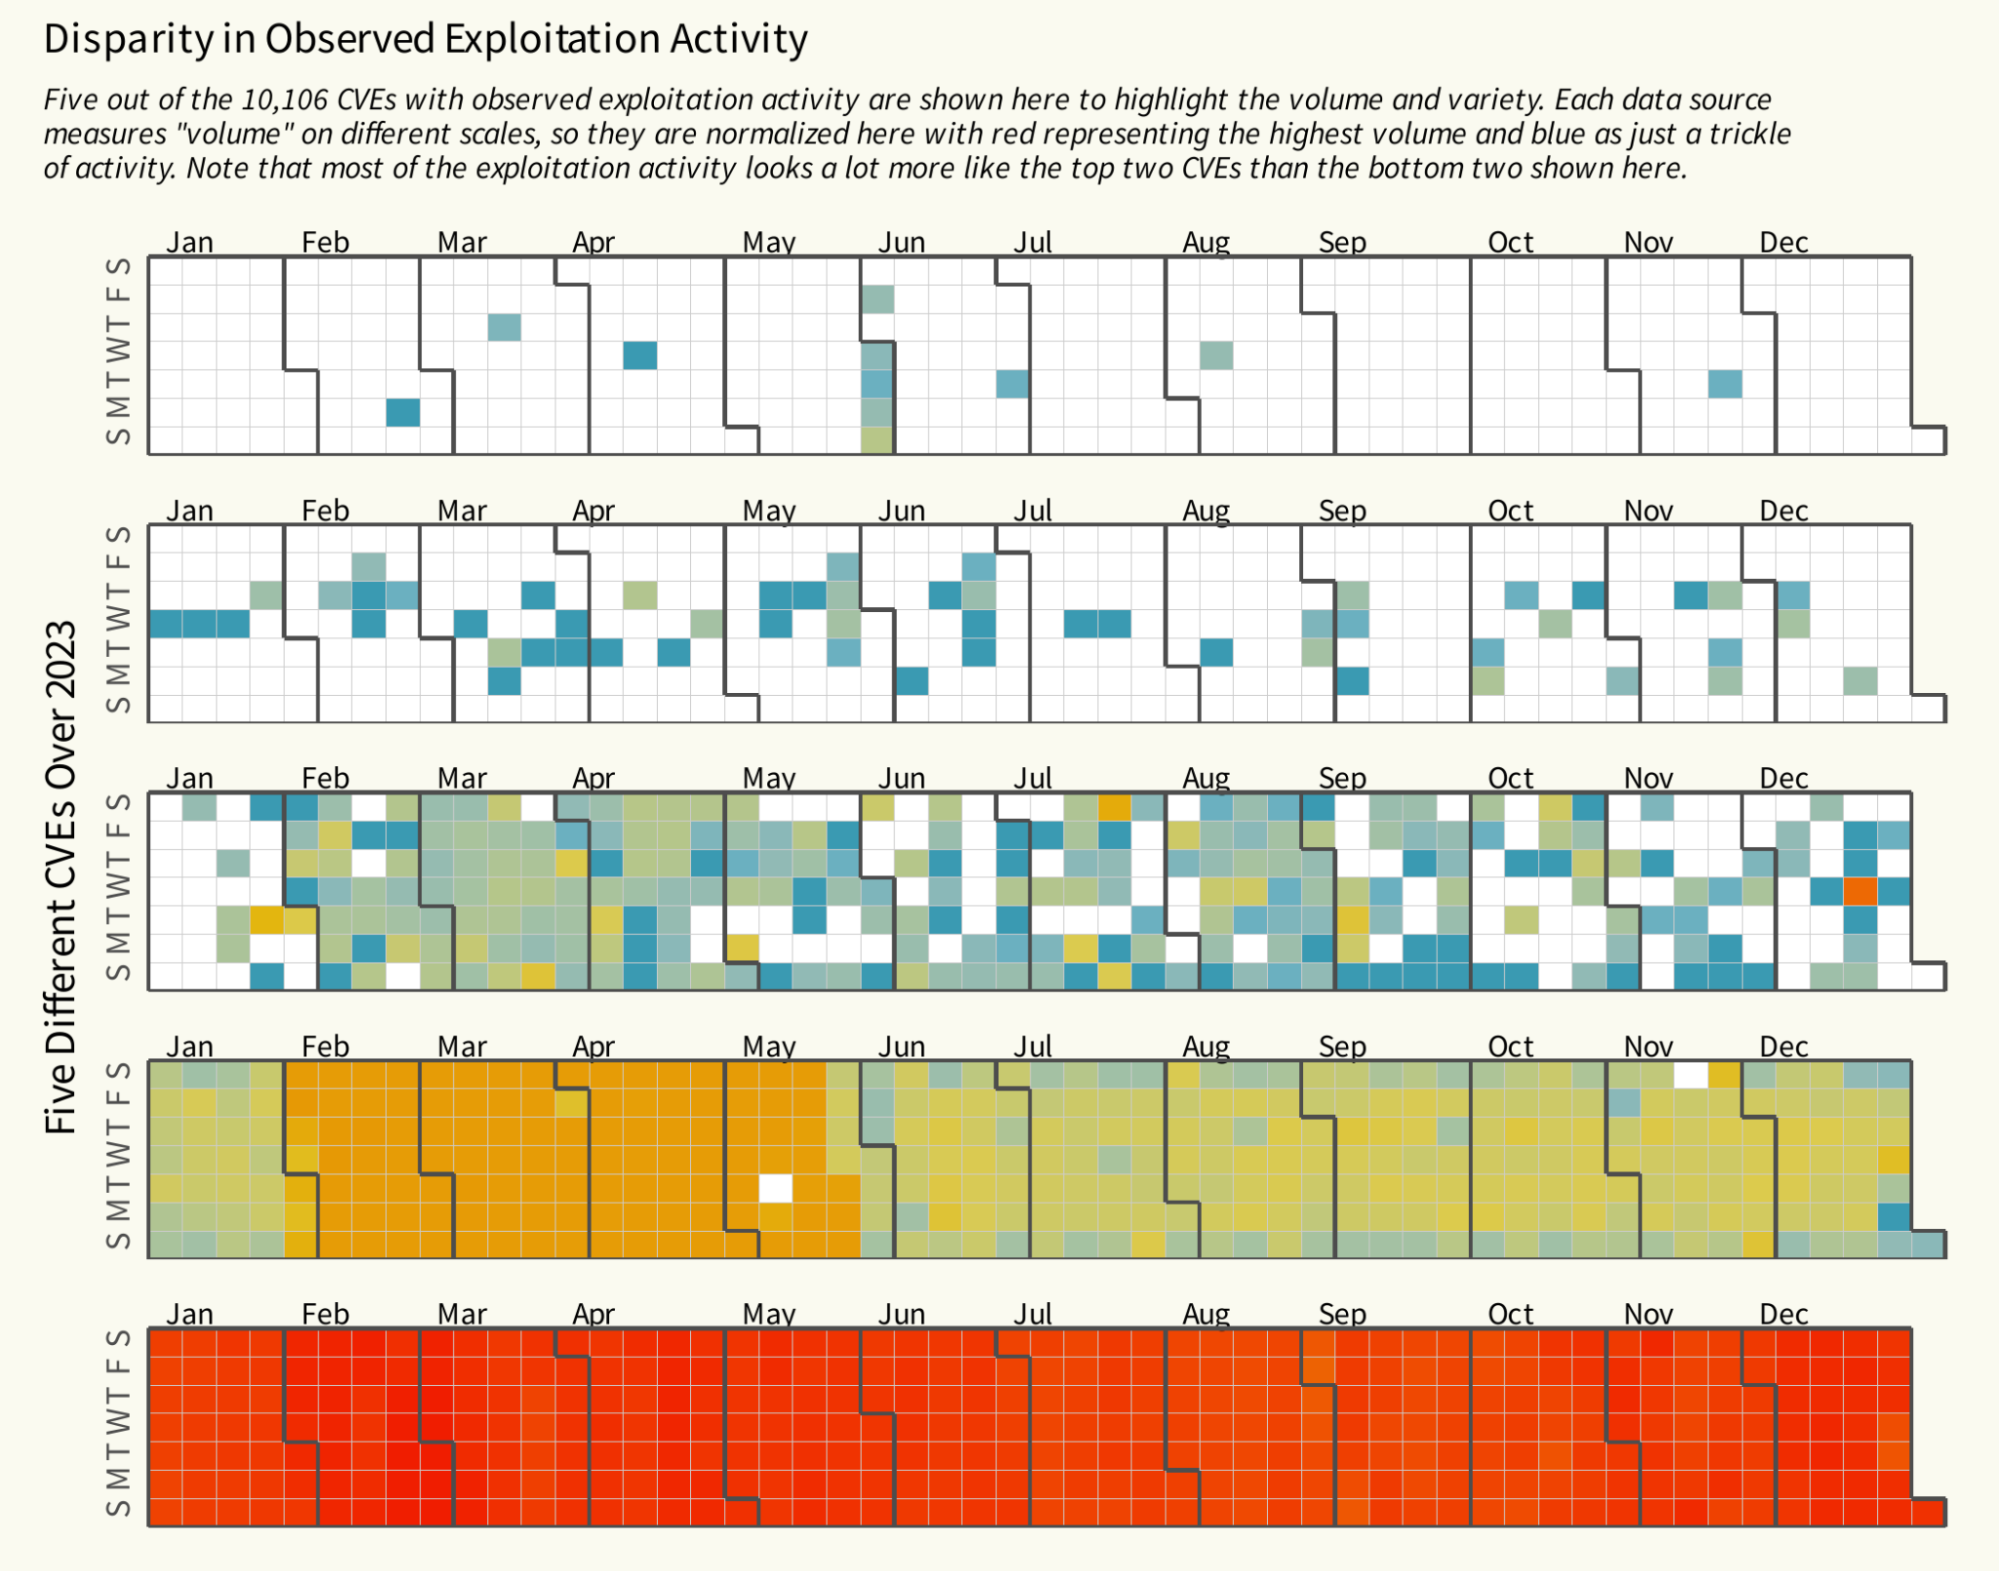 Figure shows Disparity in Observed Exploitation Activity 